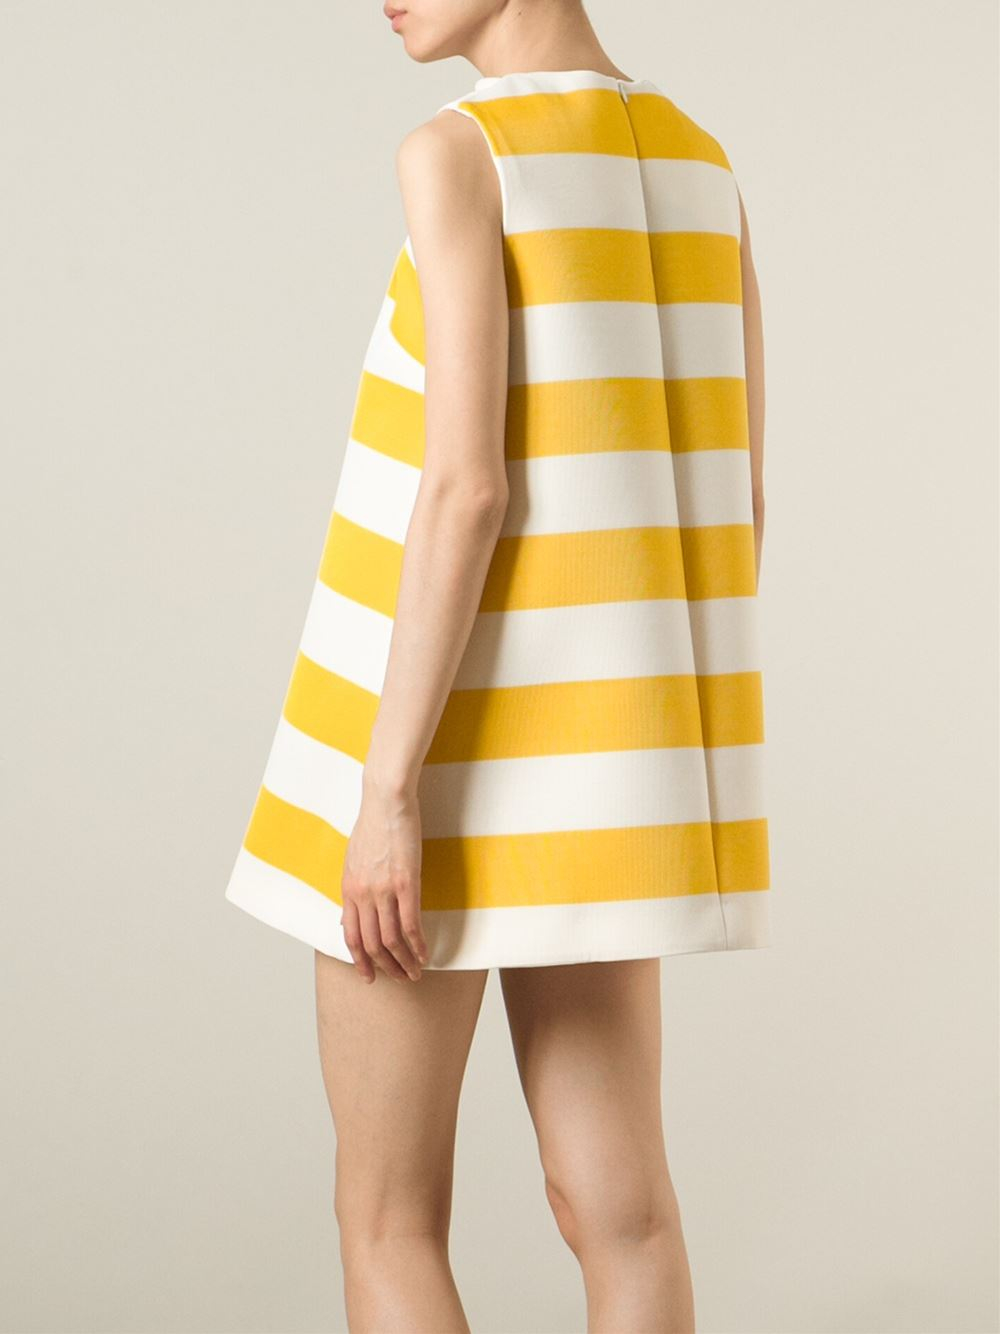 Jacquemus Striped A-Line Dress in White ...